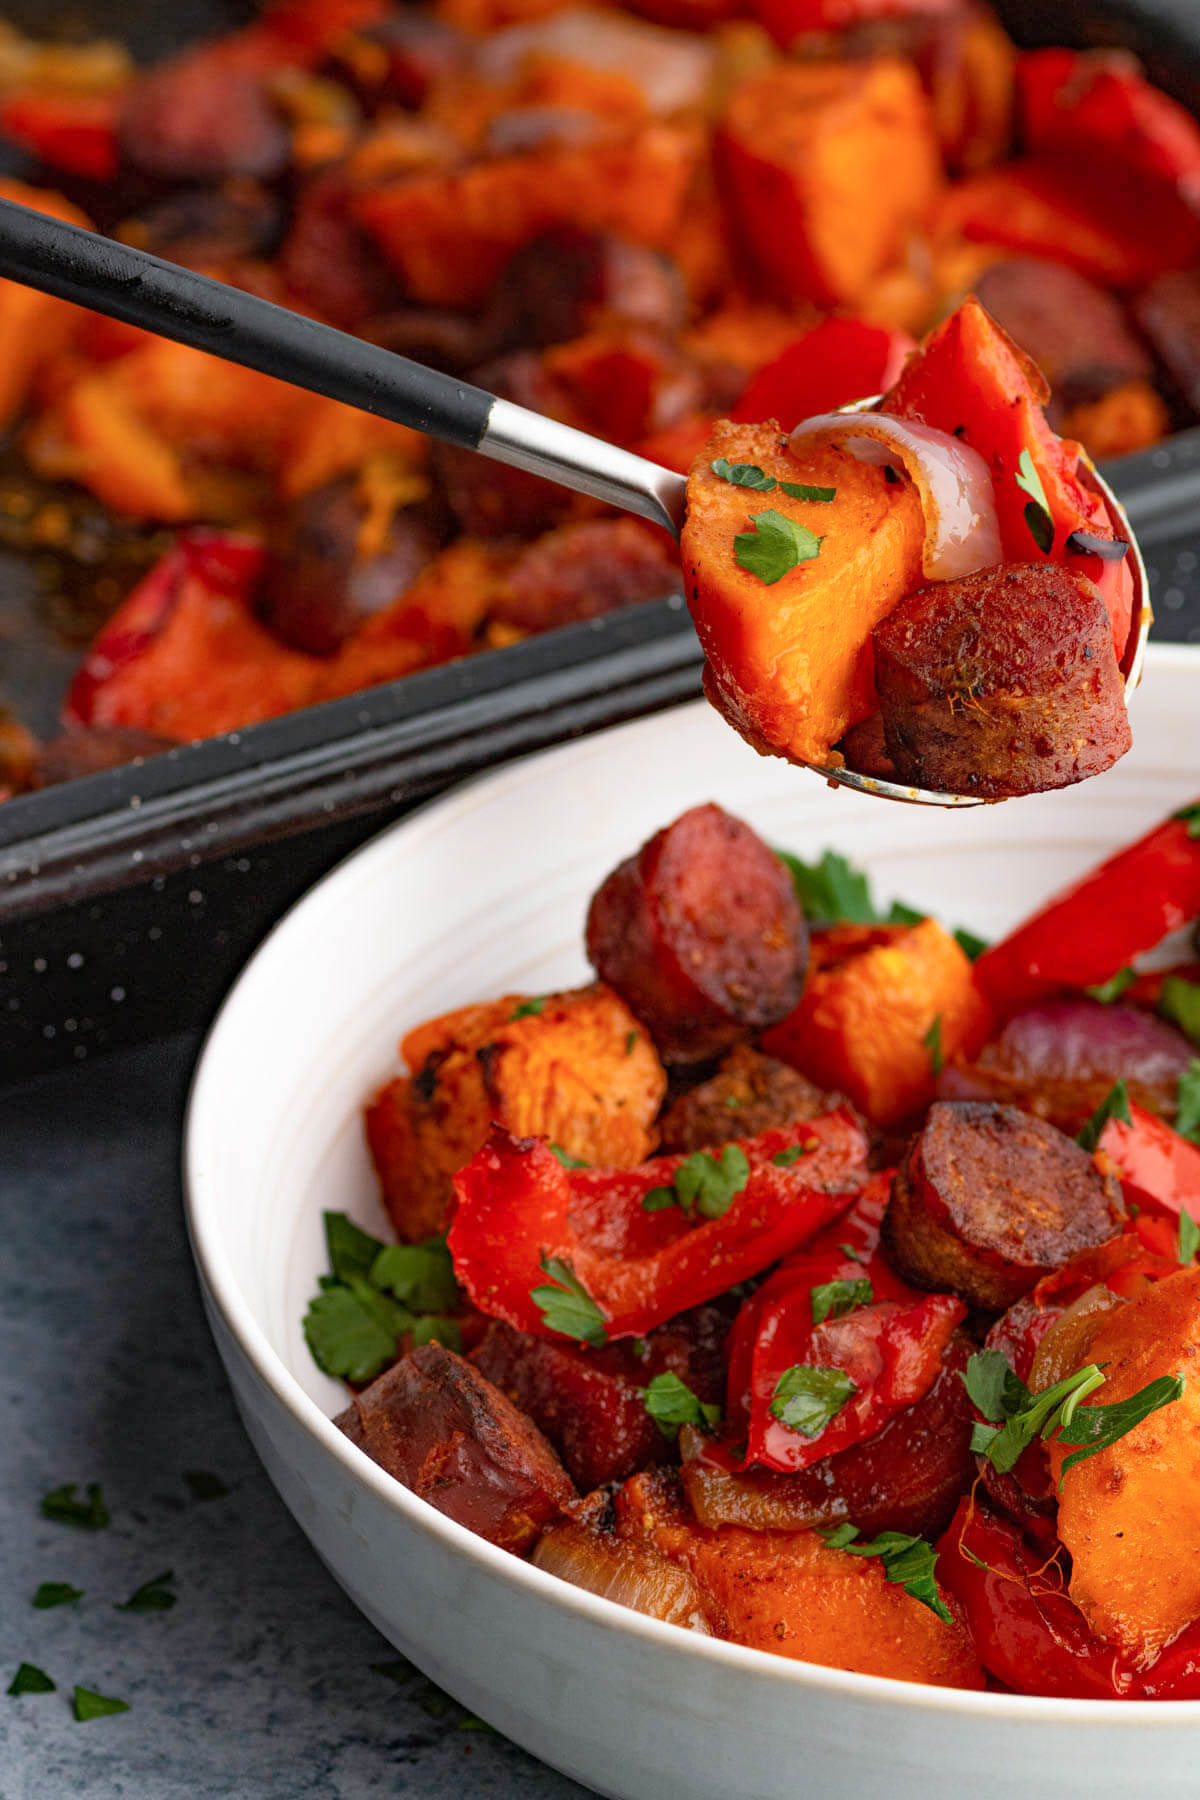 A spoon holds brightly coloured chorizo sausage and veggies over a bowl of the same.